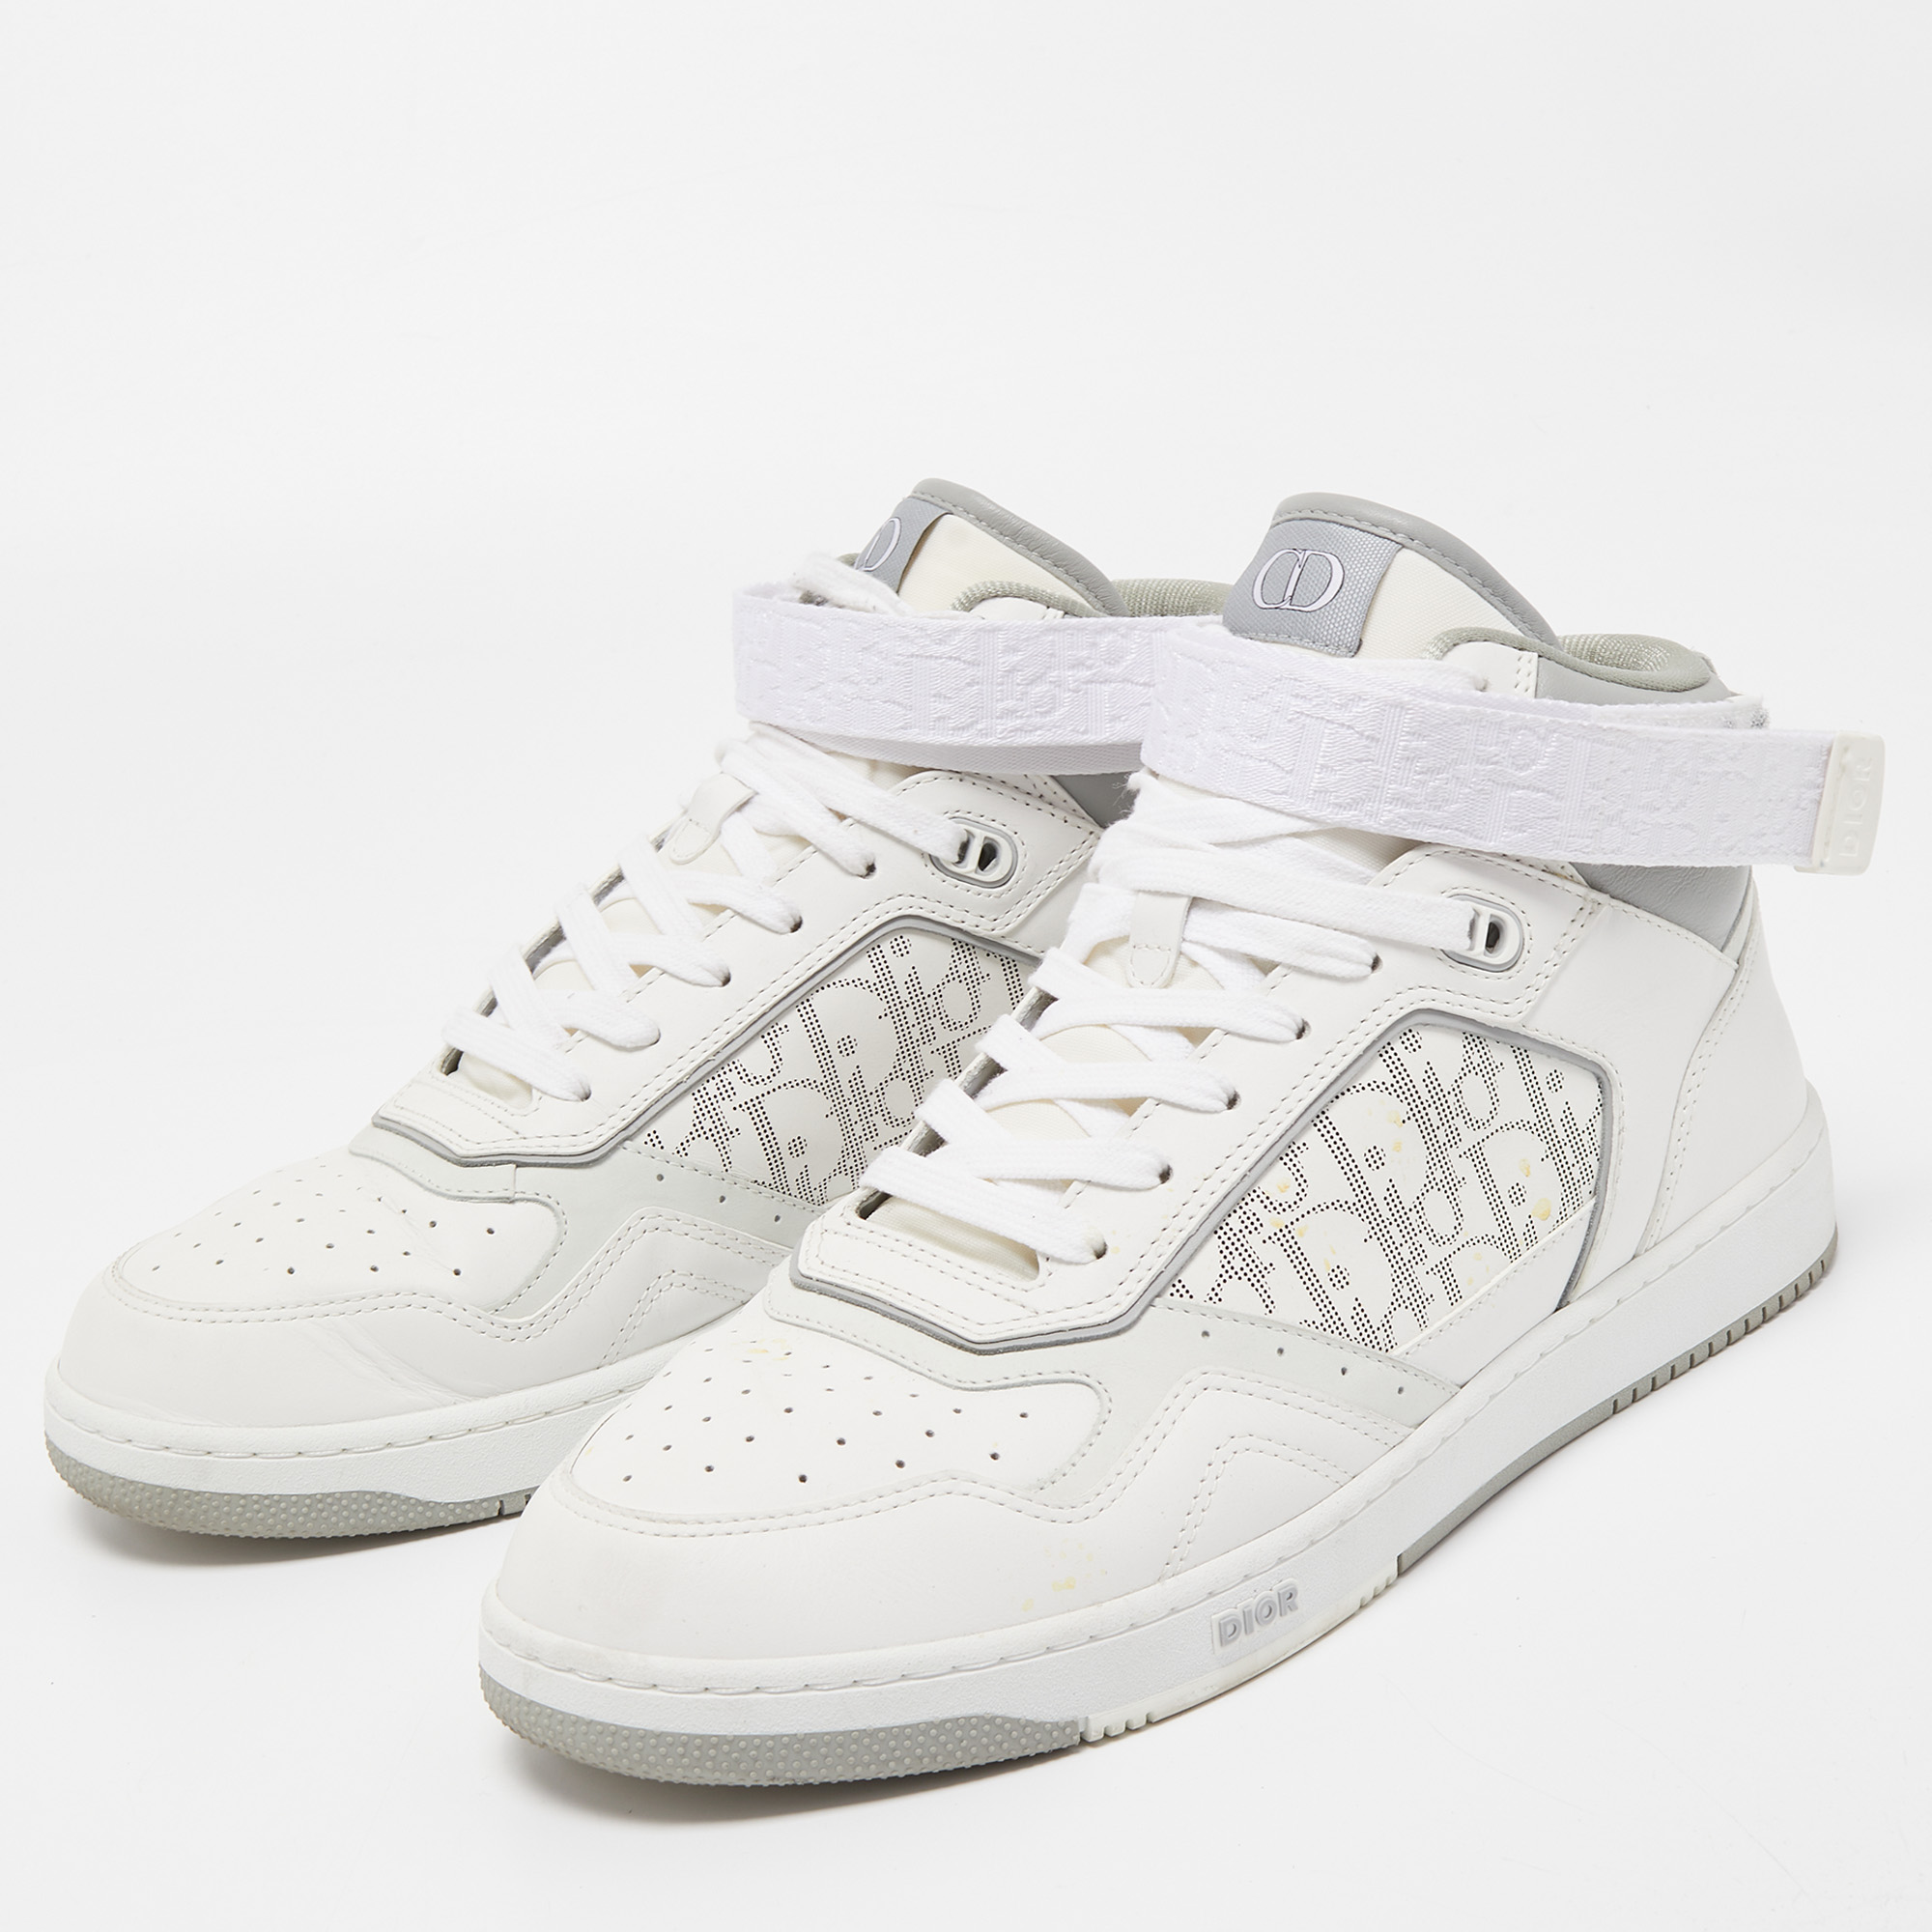 

Dior White/Grey Leather B27 High Top Sneakers Size